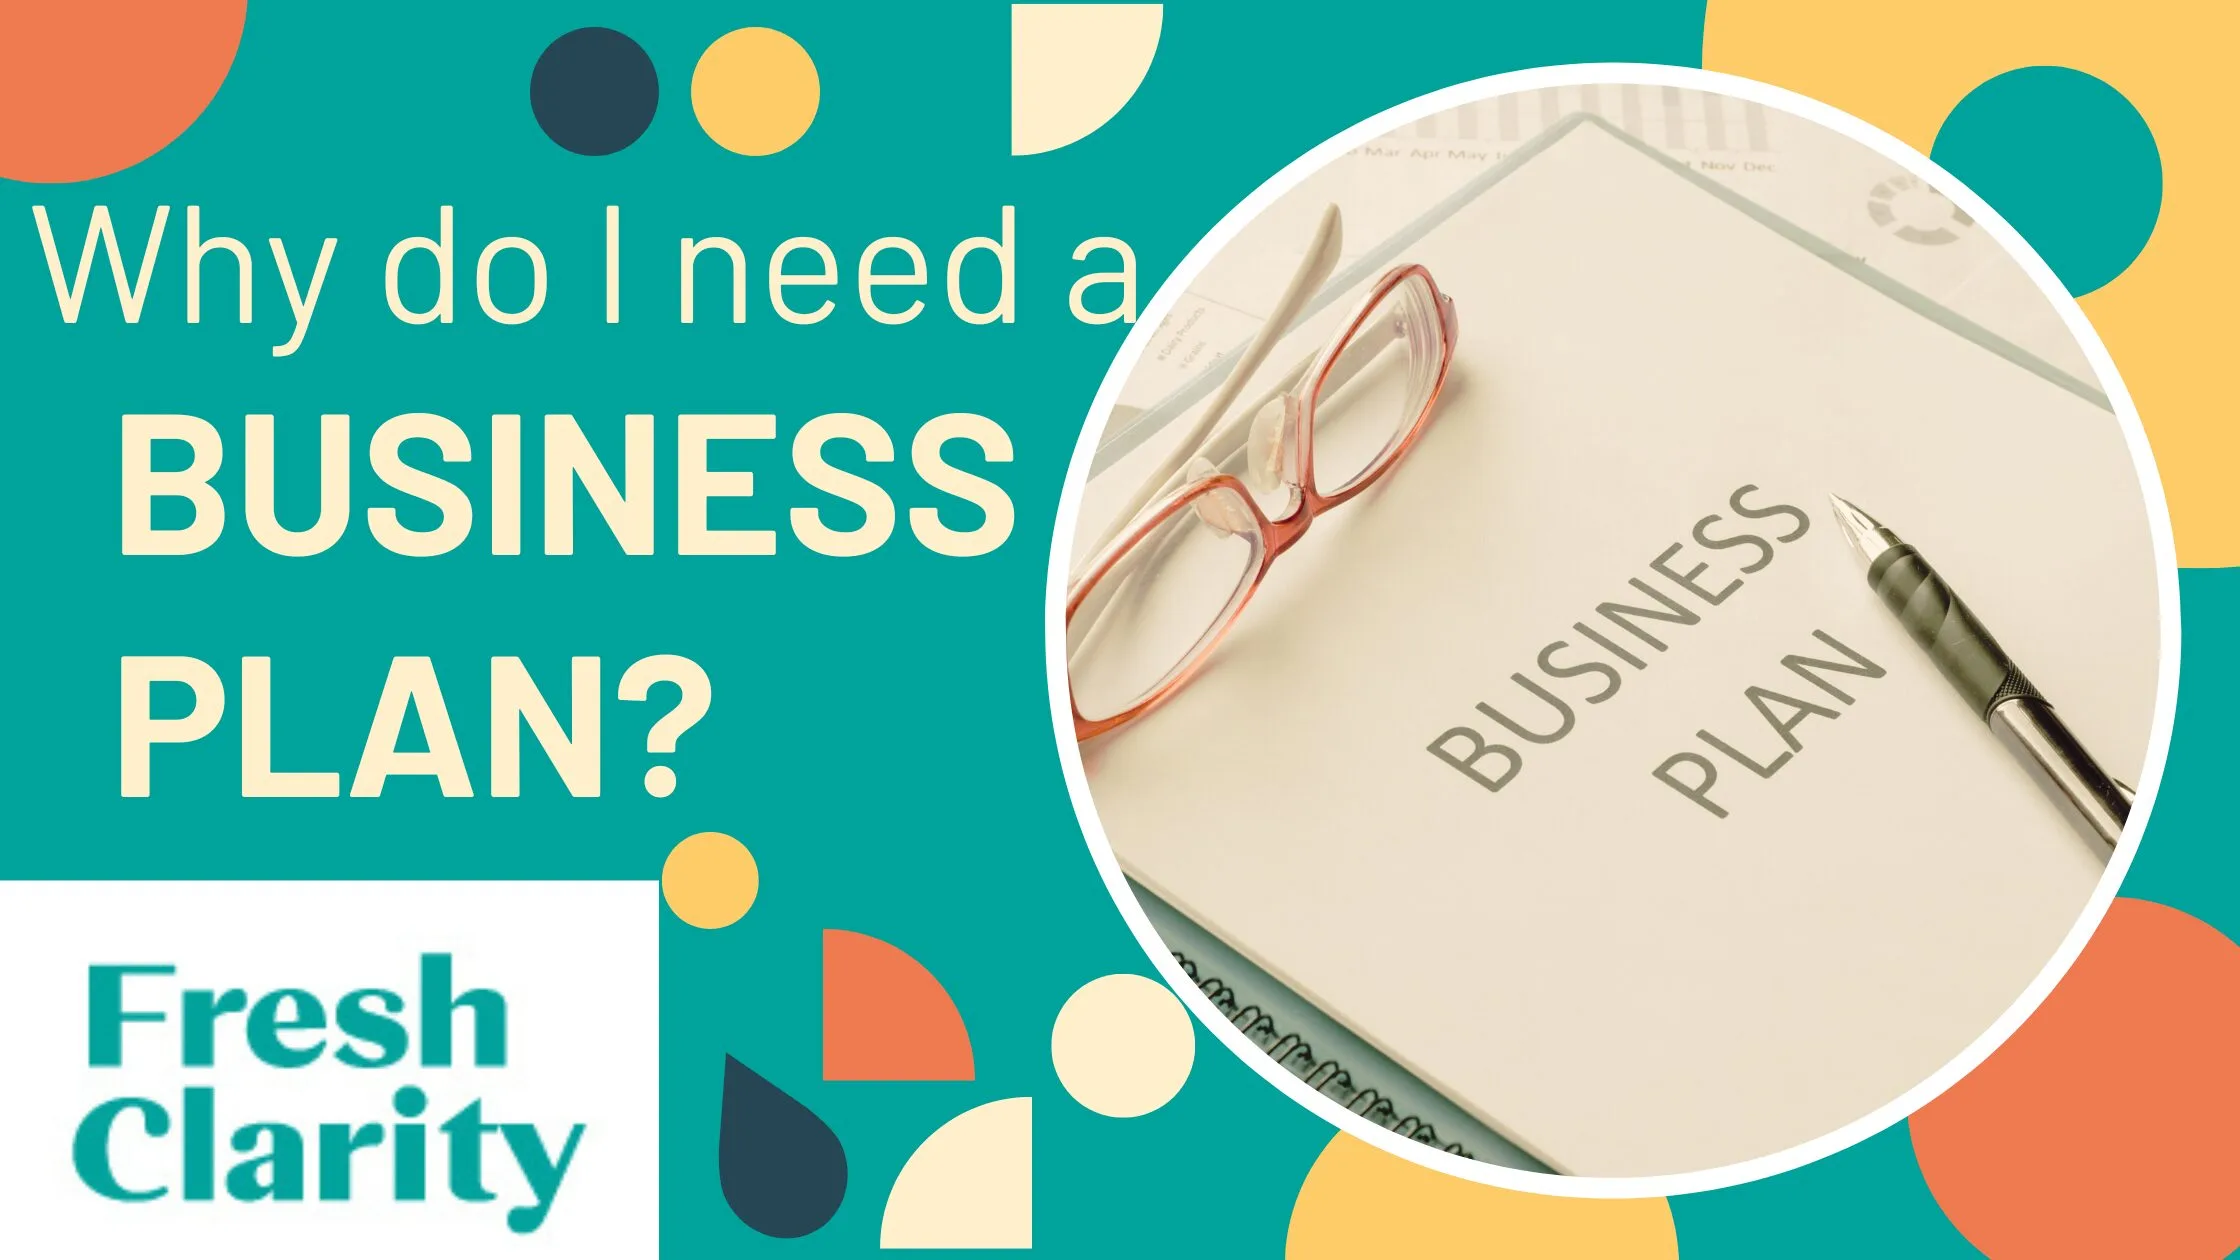 Why do I need a Business Plan? circle image with a notepad with business plan written on, a pen and glasses